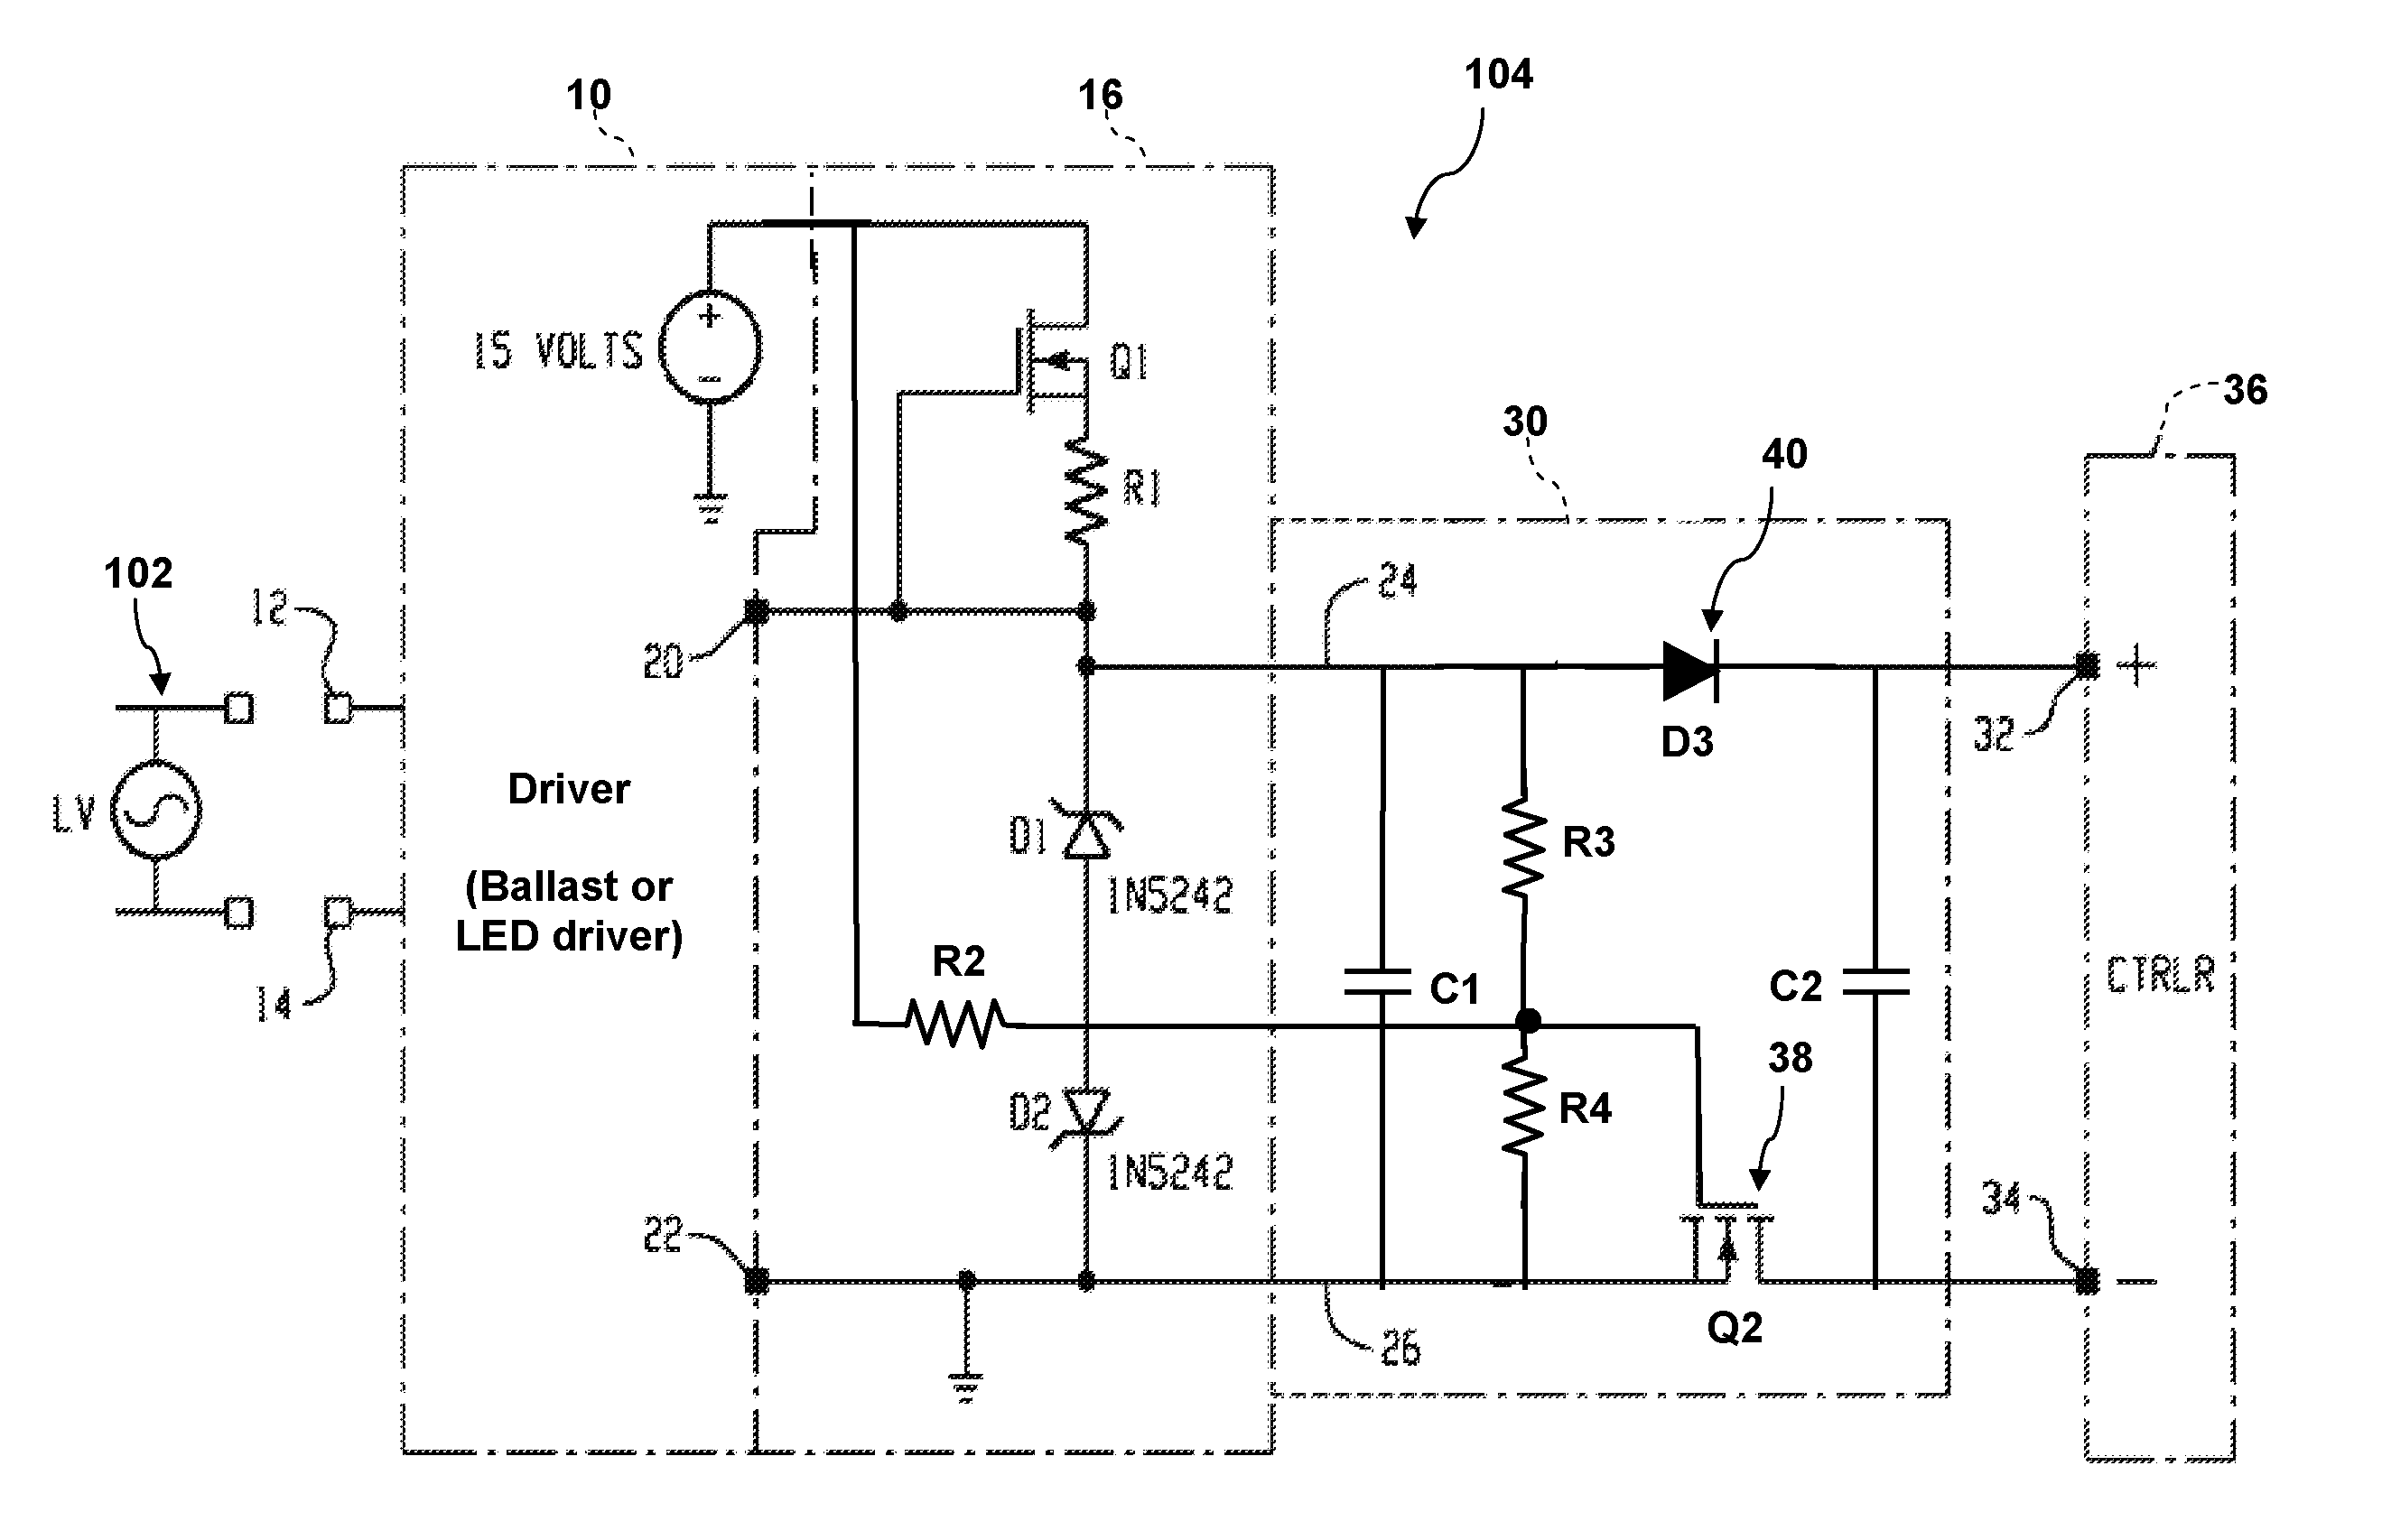 Lamp assembly and circuits for protection against miswiring in a lamp controller